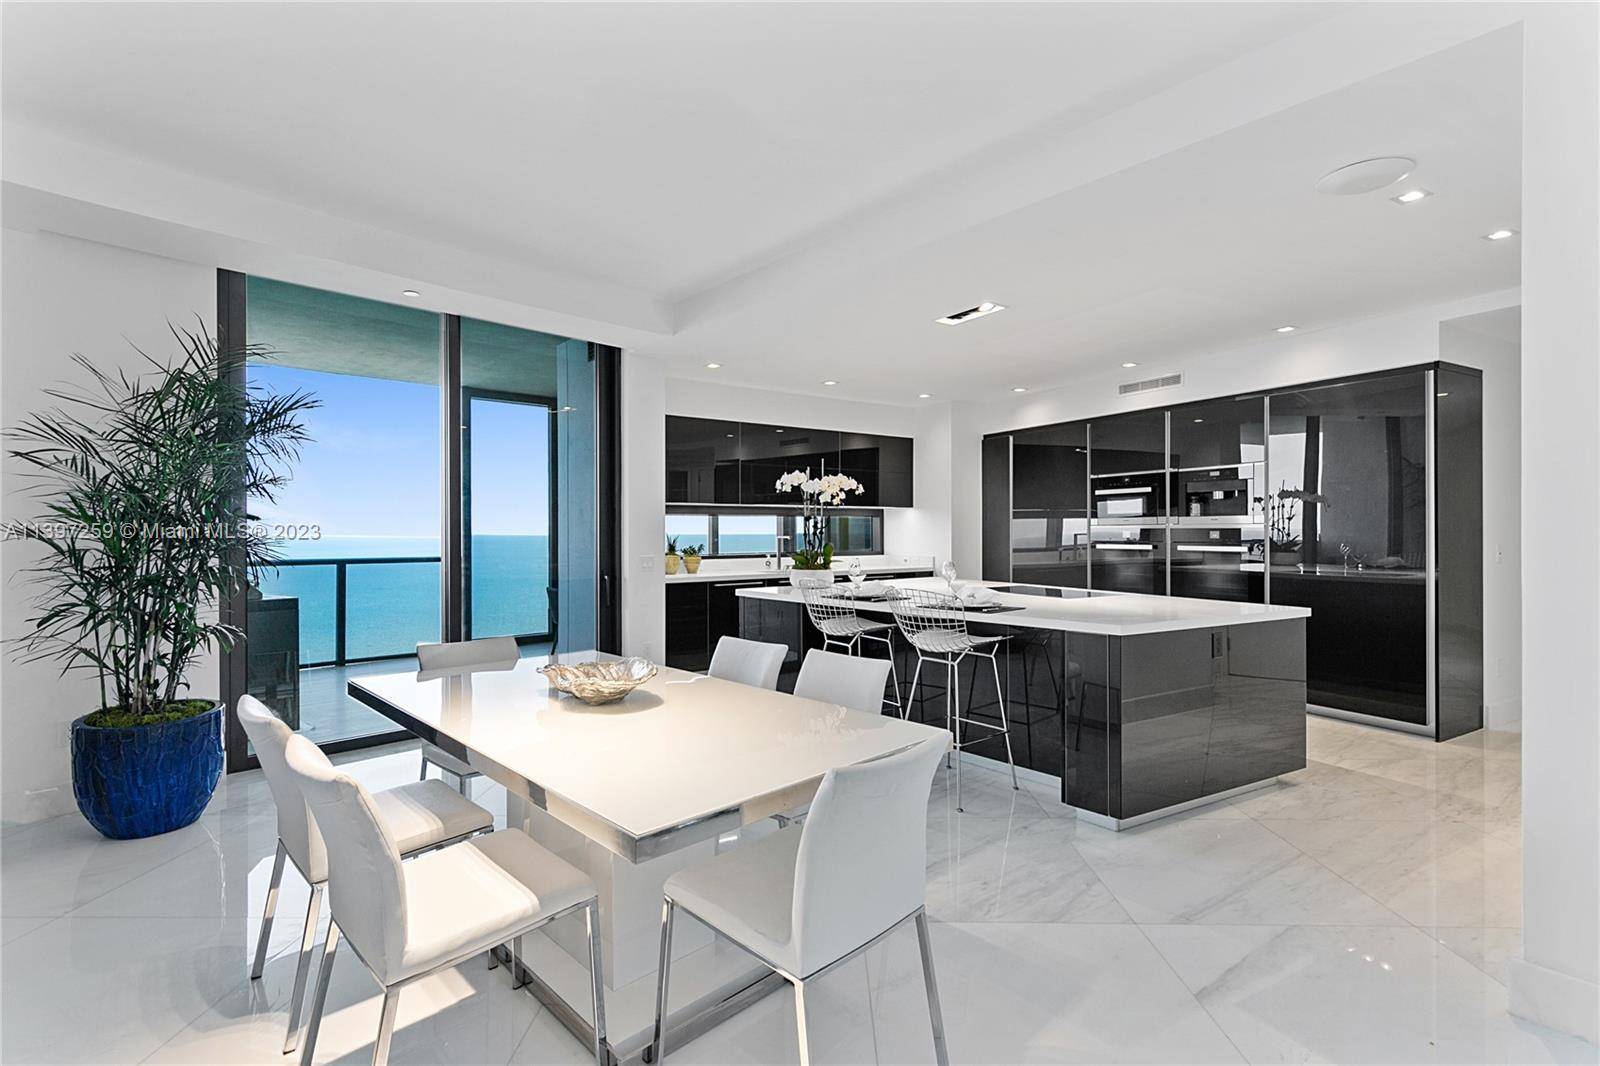 Welcome to Porsche Design Tower, the most ingenious and luxurious residential tower on the ocean in Sunny Isles Beach.